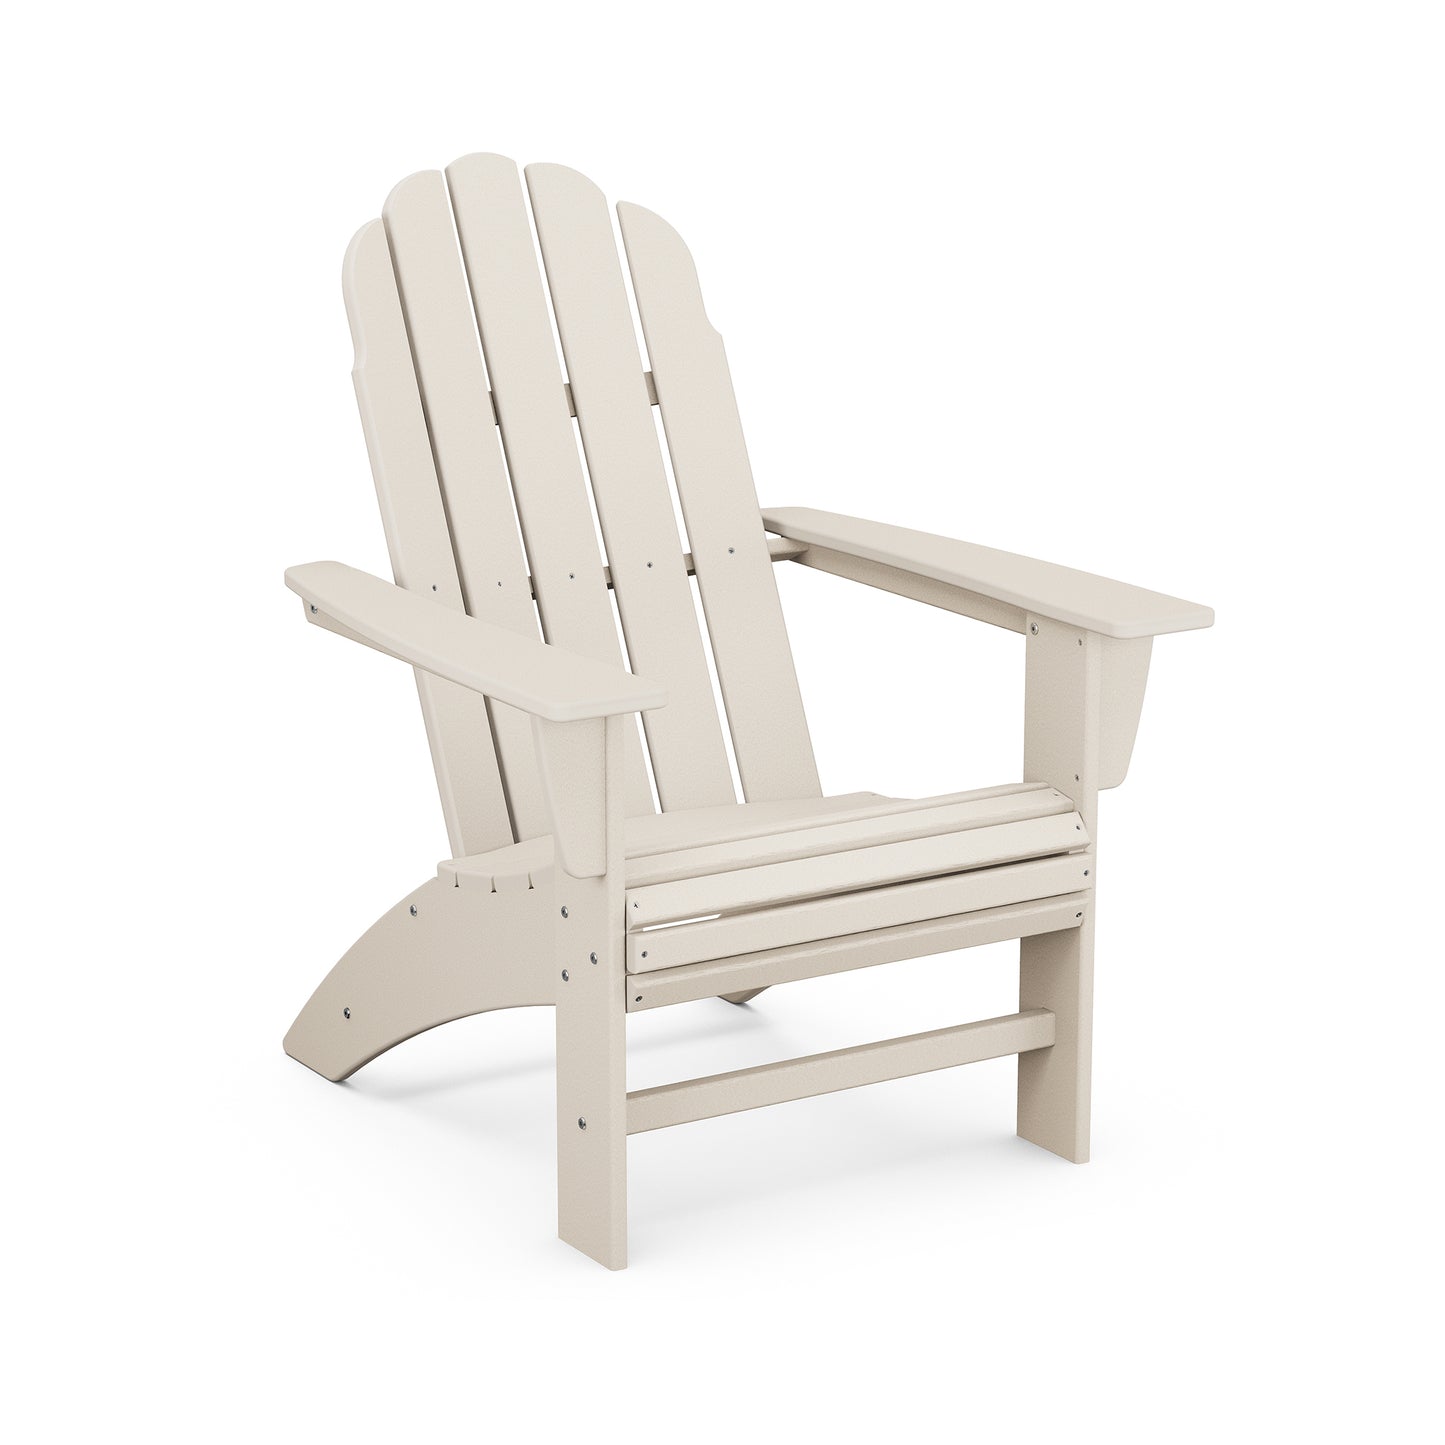 A beige POLYWOOD® Vineyard Curveback Adirondack chair made of plastic, featuring a contoured seat and wide armrests. The chair is displayed against a plain white background.